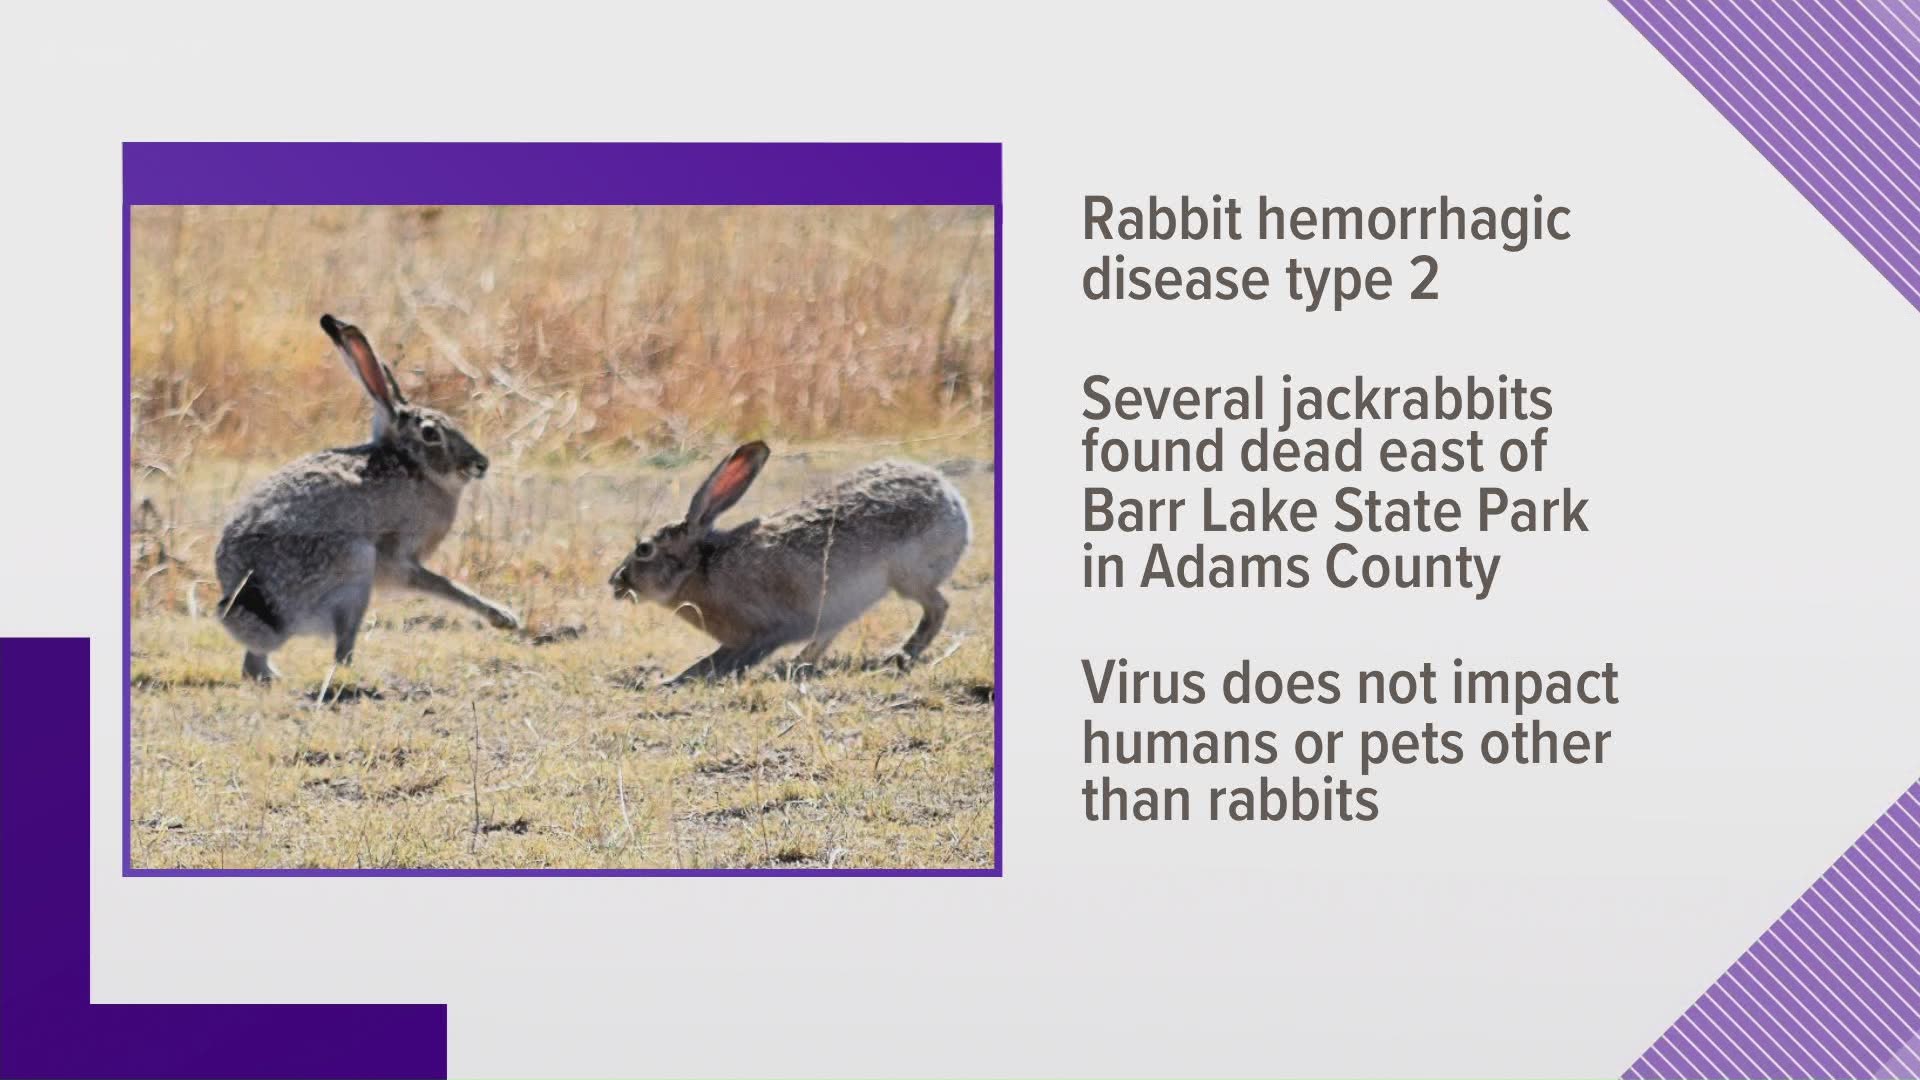 The virus does not infect humans or pets other than rabbits.